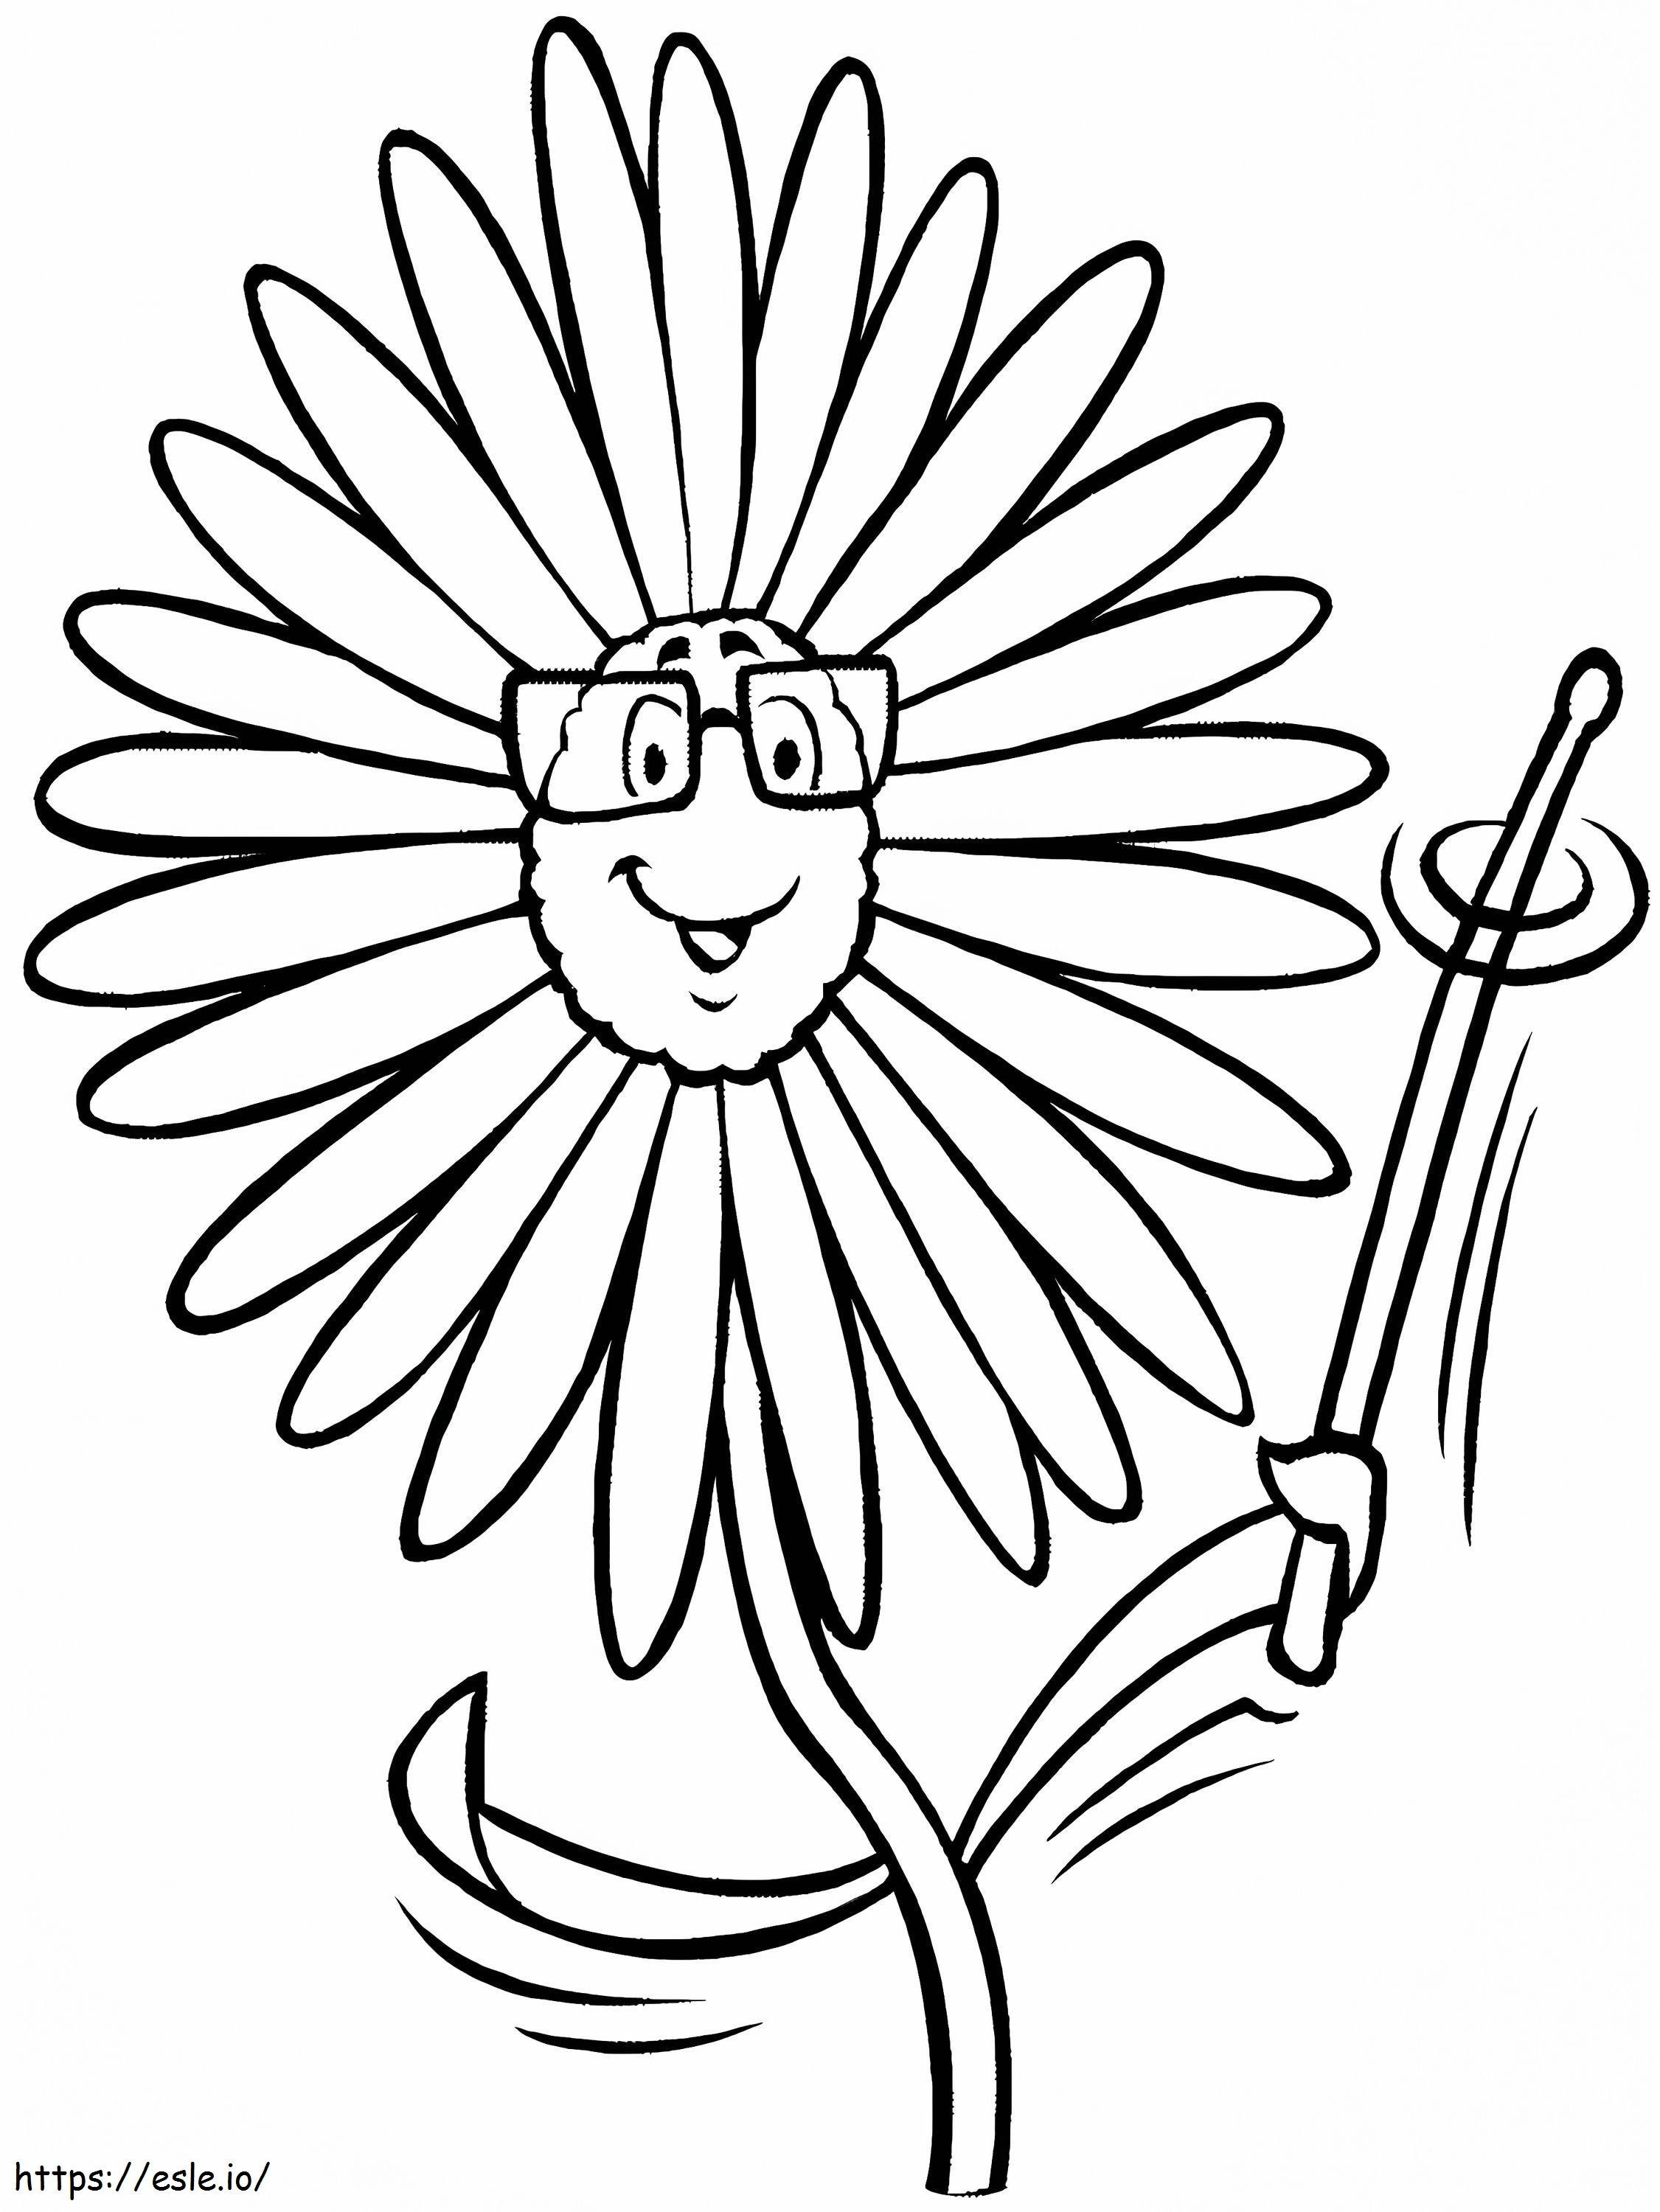 1528166409 Daisywithglassesa4 coloring page